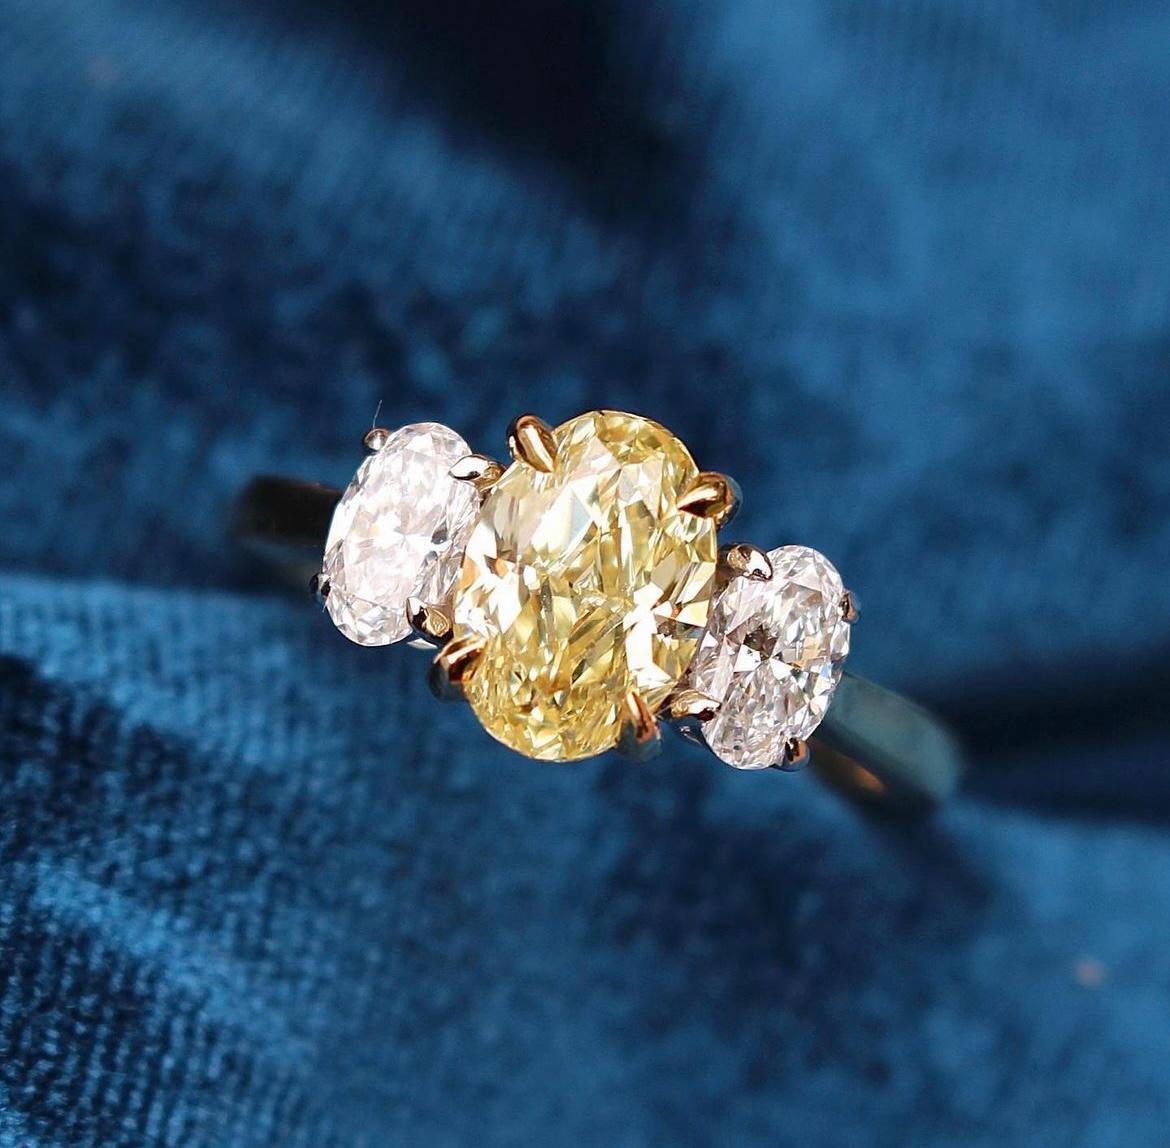 Centered upon a 1.5 Carat Oval shaped Yellow Diamond. Flanked by Oval diamonds weighing 0.60 Carats. 

Center stone is certified Fancy Yellow by GIA. 

Set in Platinum and 18 Karat Yellow Gold. 